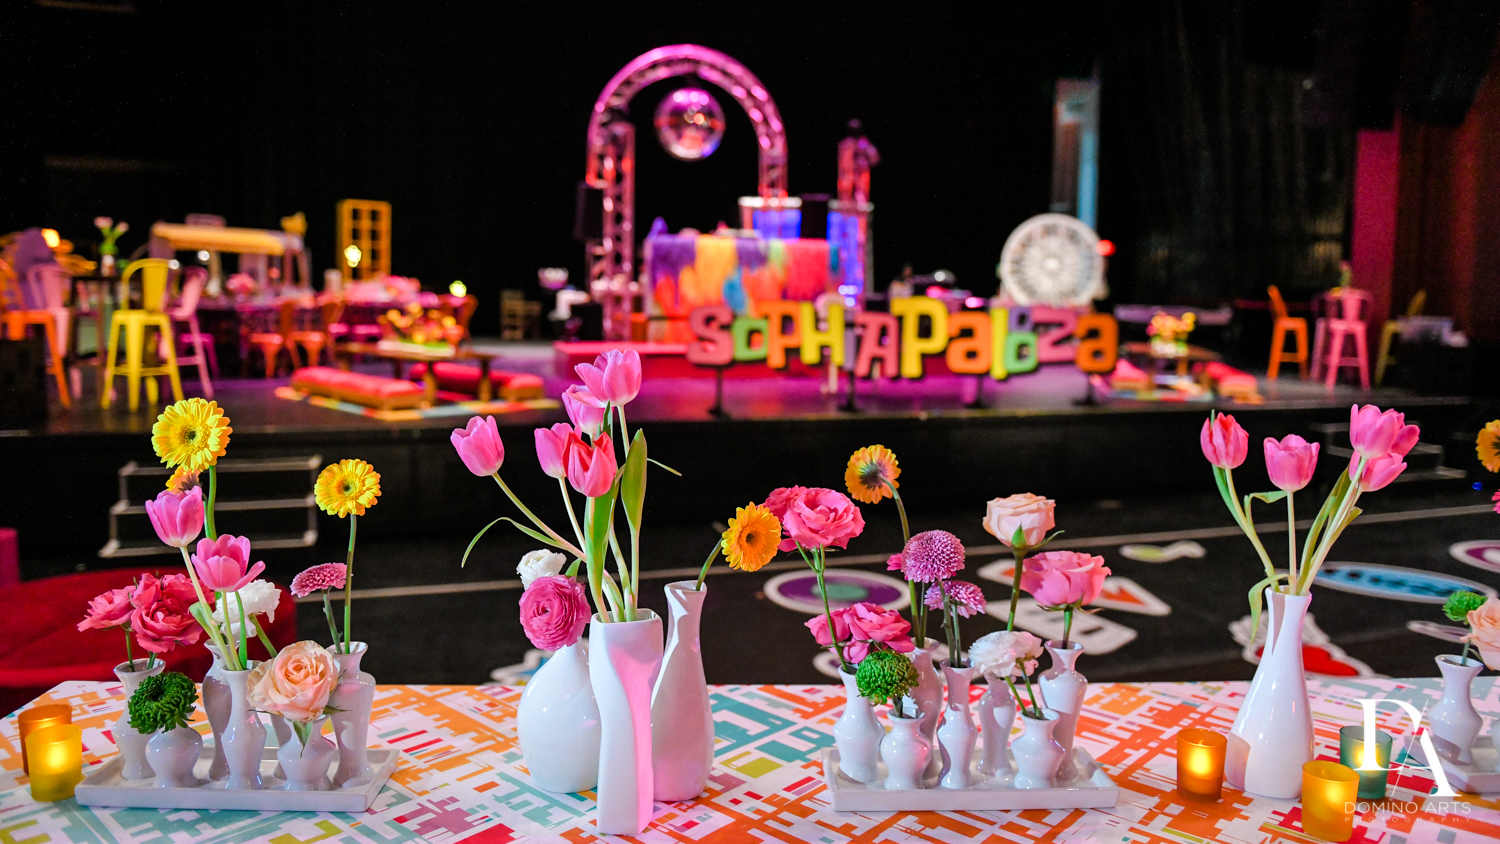 colorful decor at Music Festival Bat Mitzvah at The Fillmore Miami Beach by Domino Arts Photography